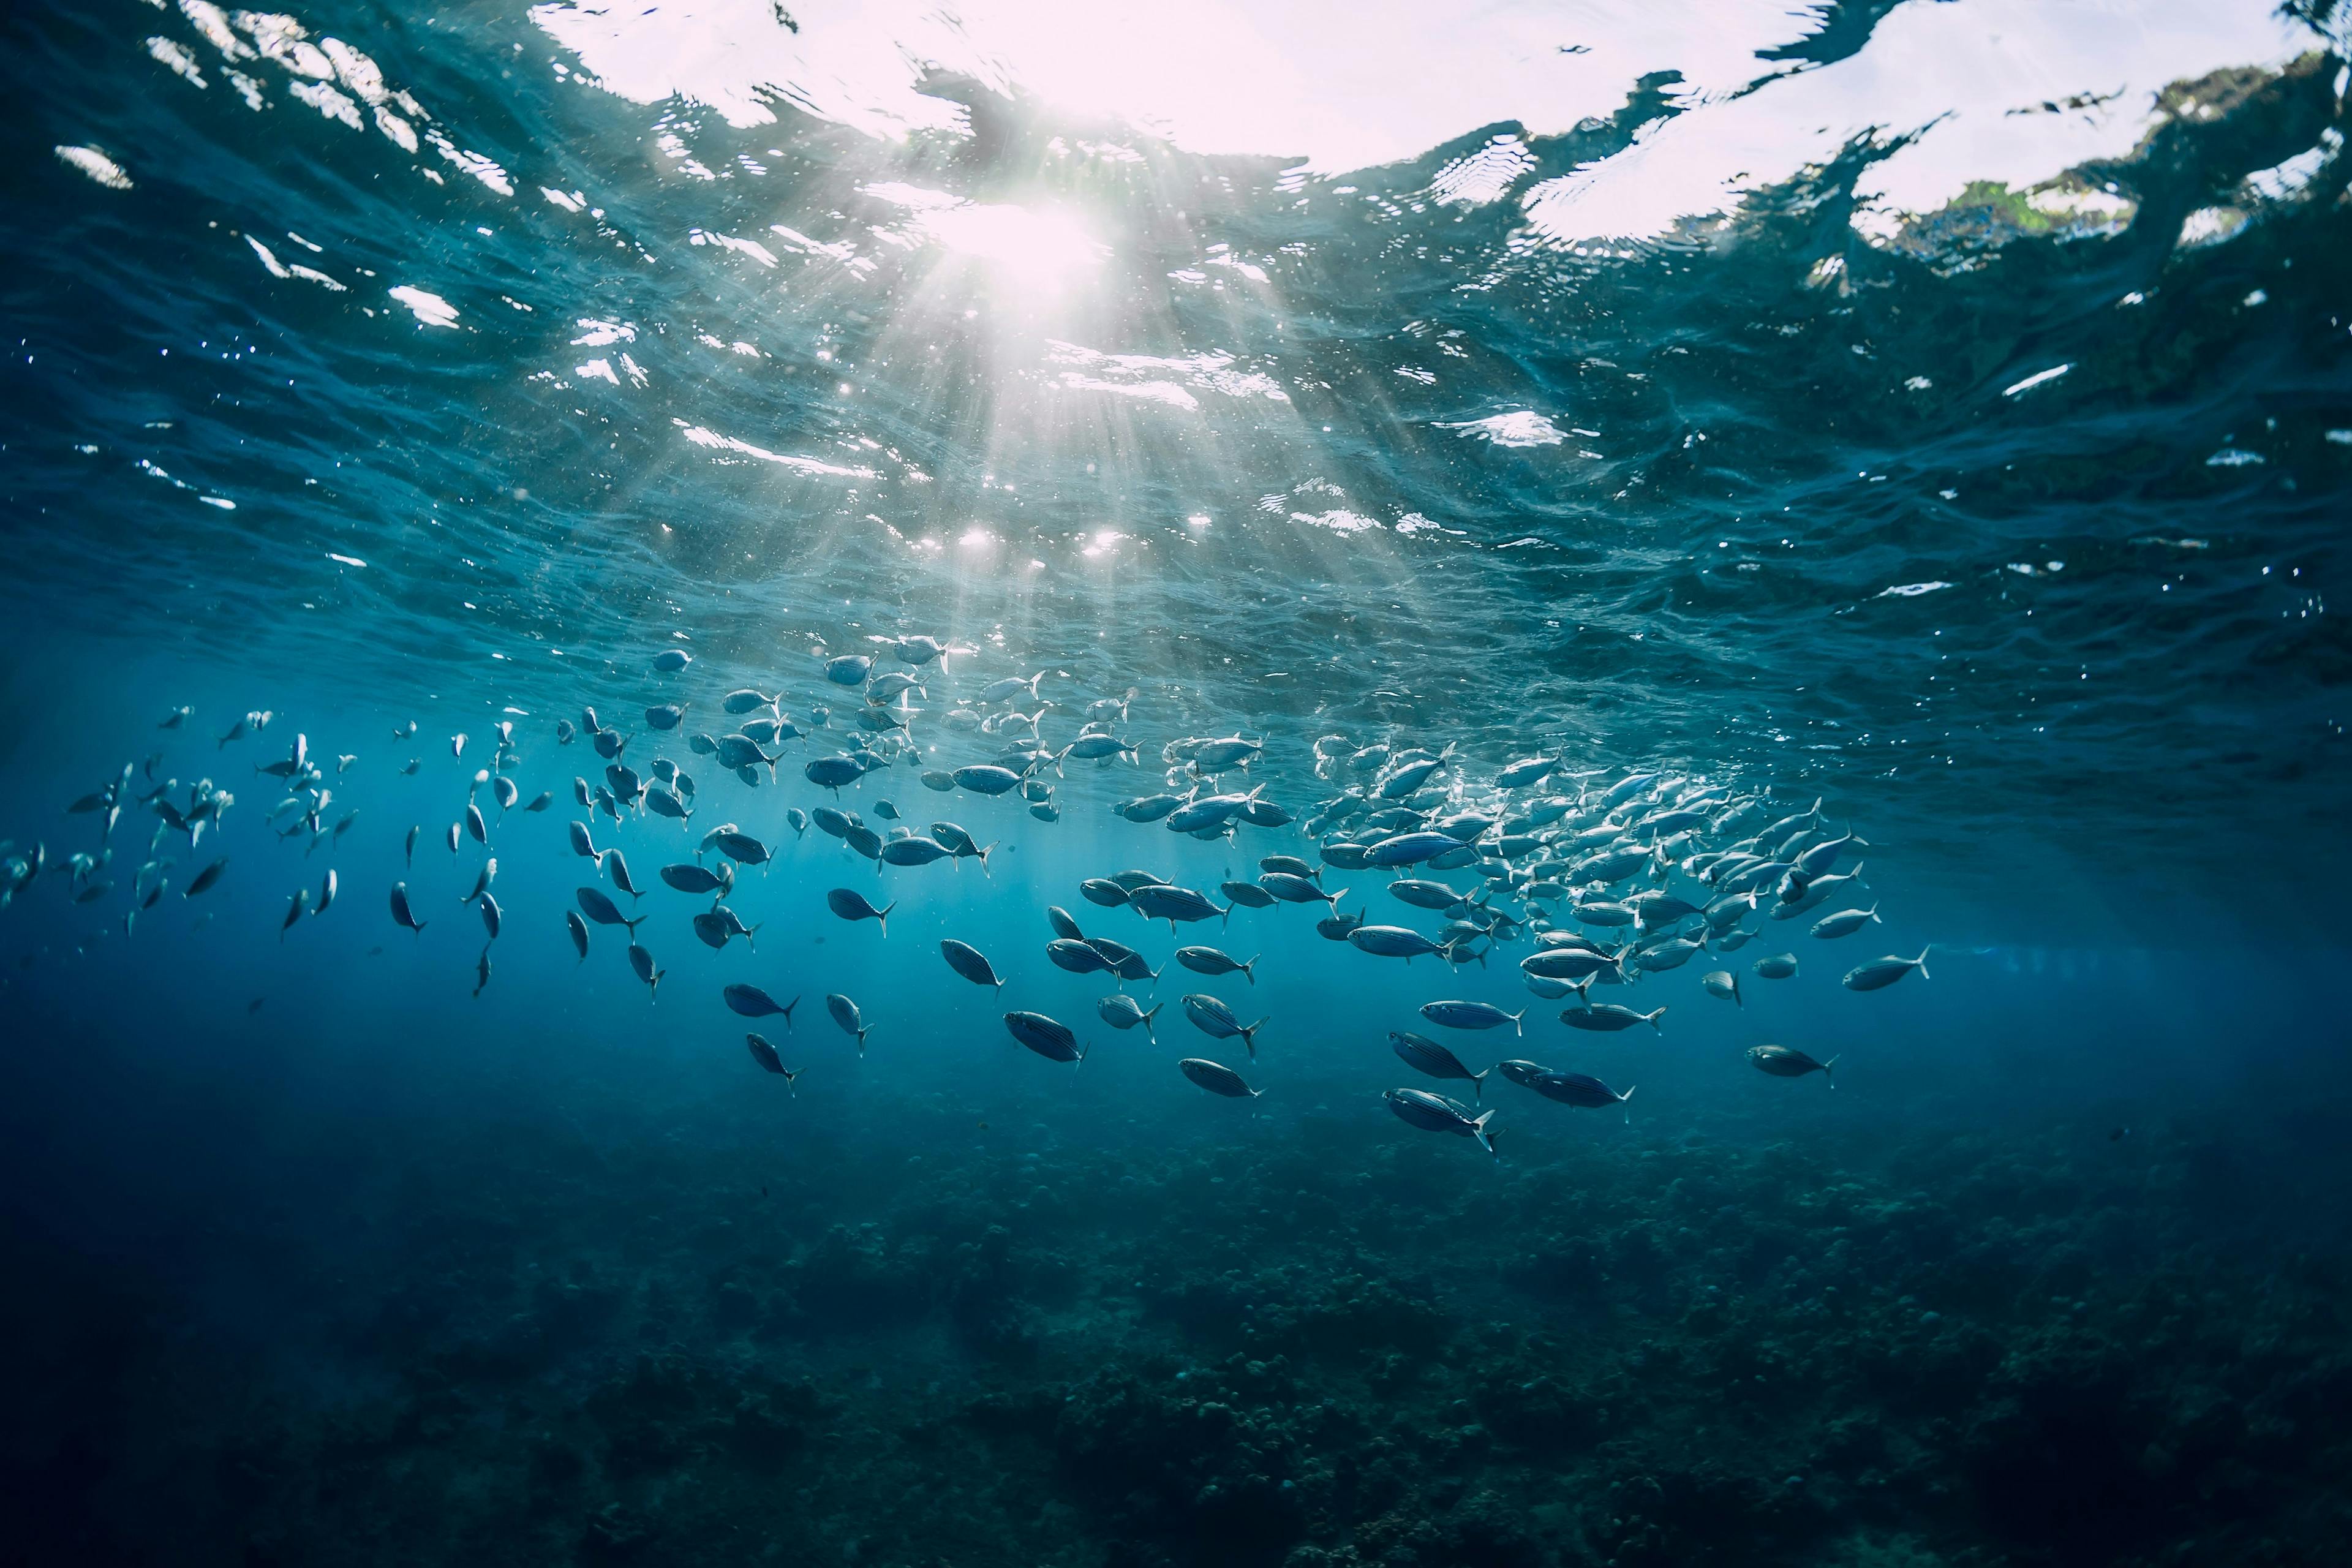 Underwater view with school fish in ocean. Sea life in transparent water | Image Credit: © artifirsov - stock.adobe.com